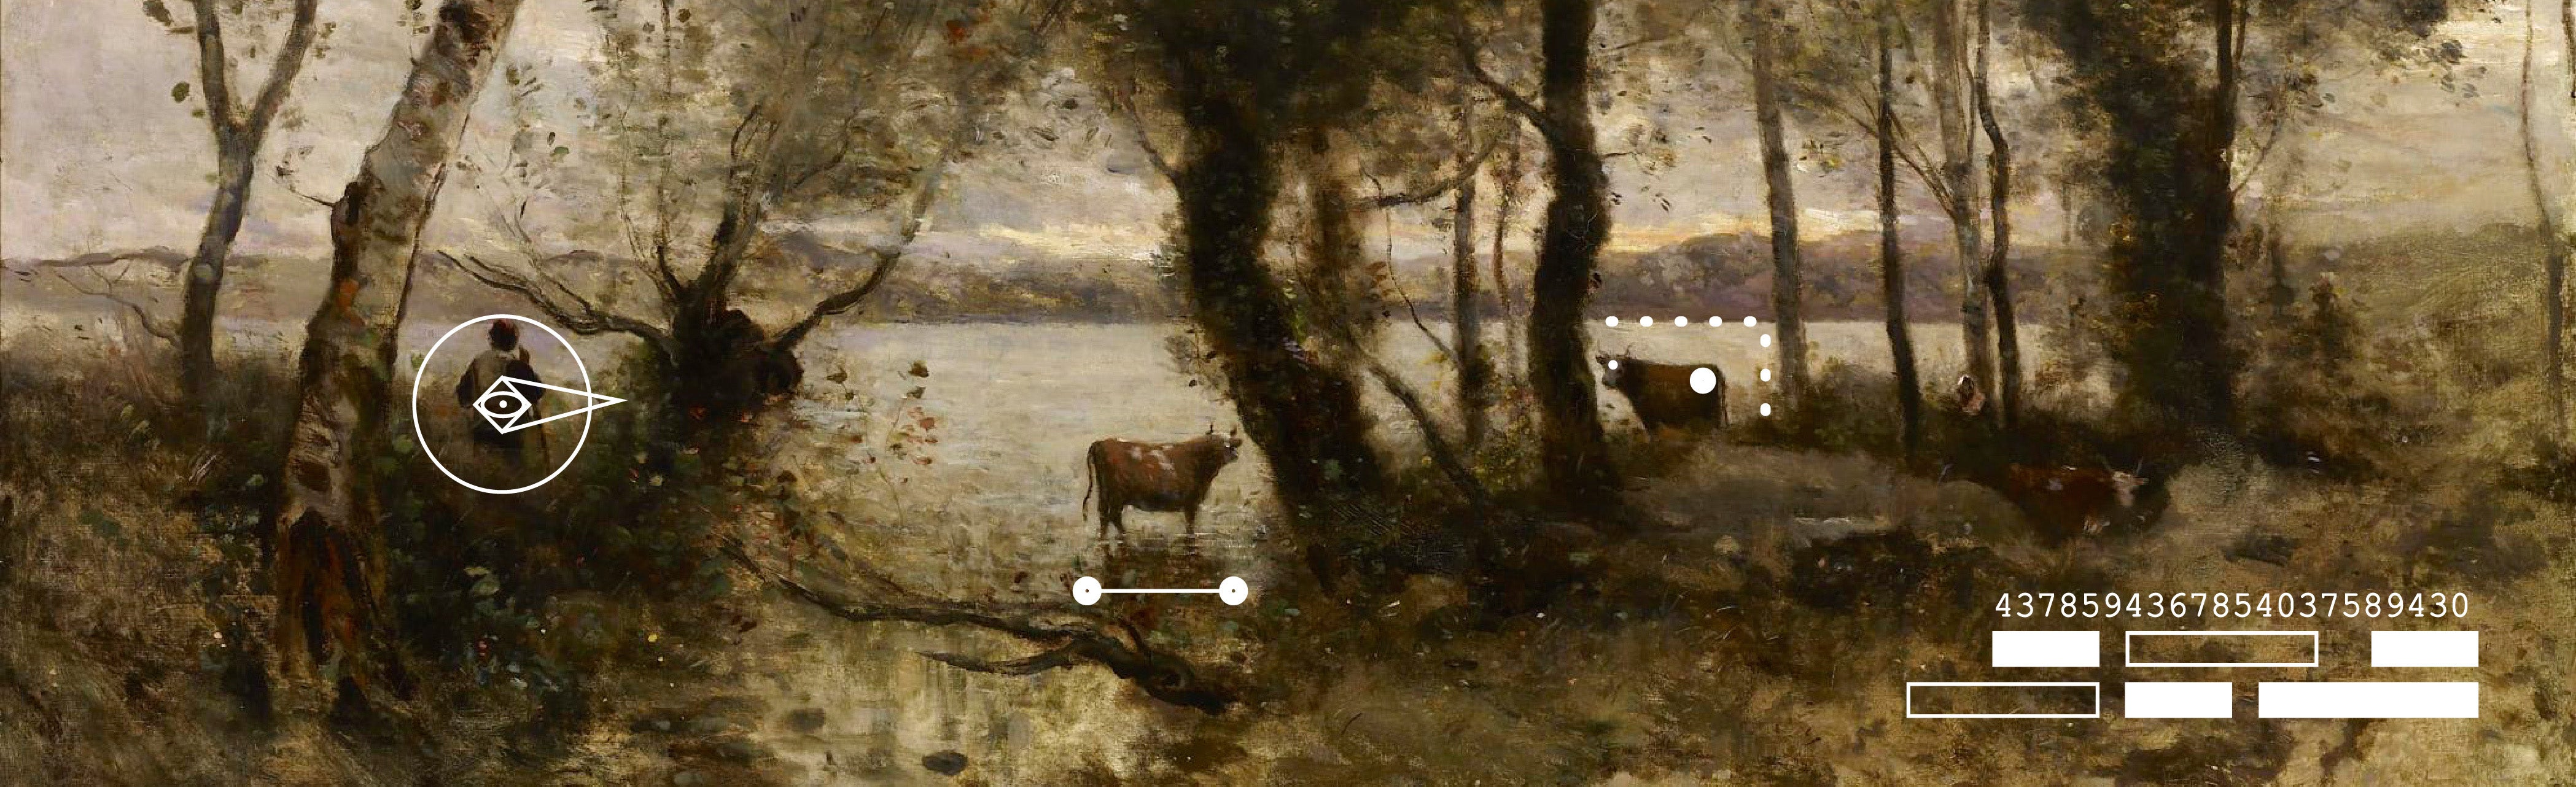 Landscape painting with a figure and two cows and an overlay of white shapes and numbers.